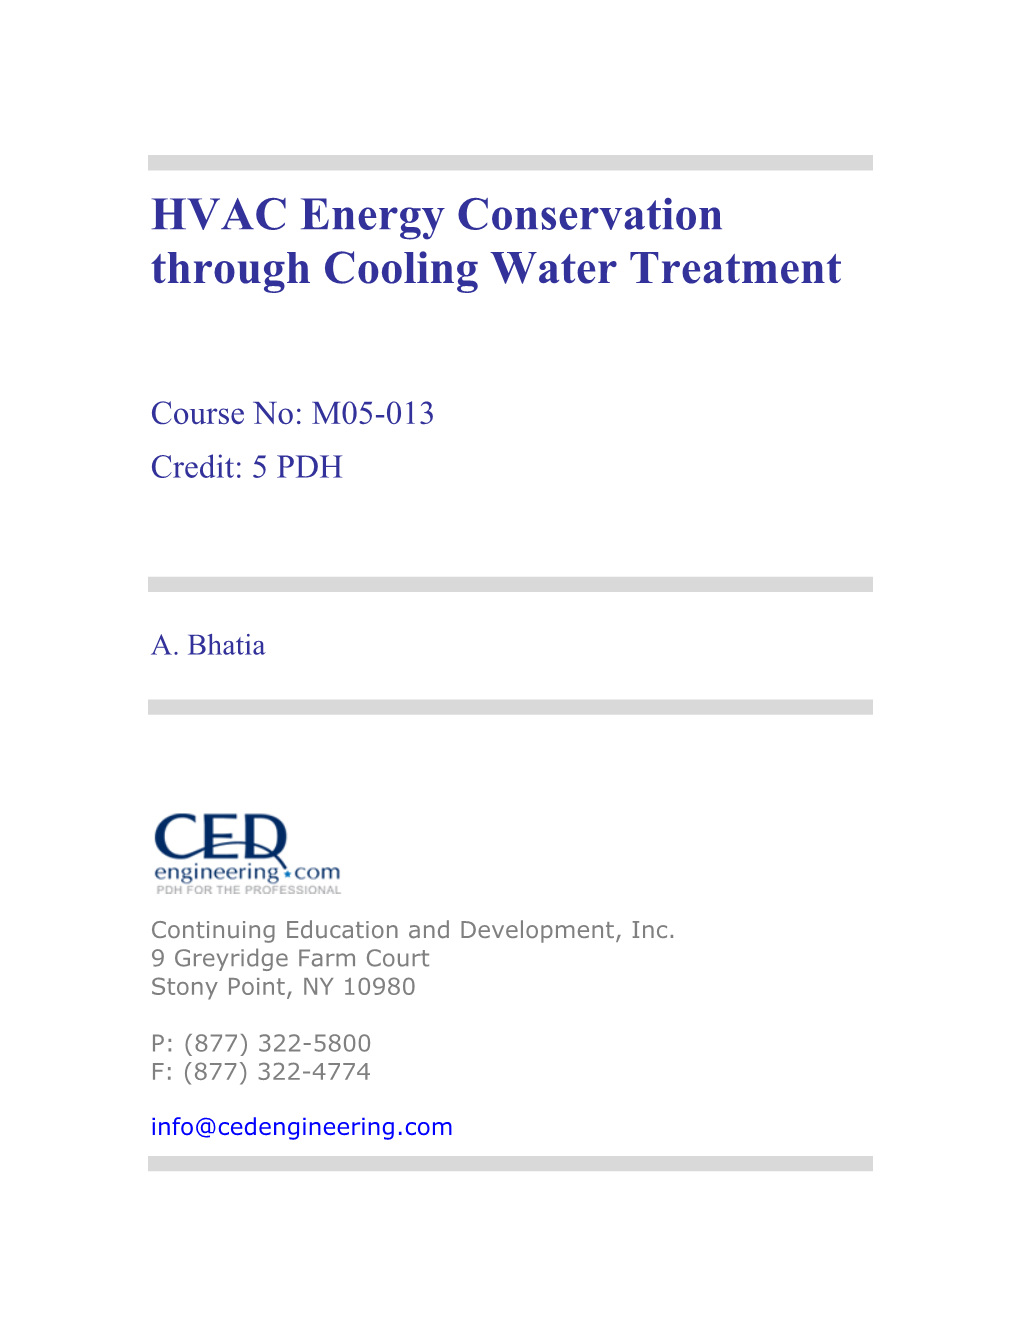 HVAC Energy Conservation Through Cooling Water Treatment